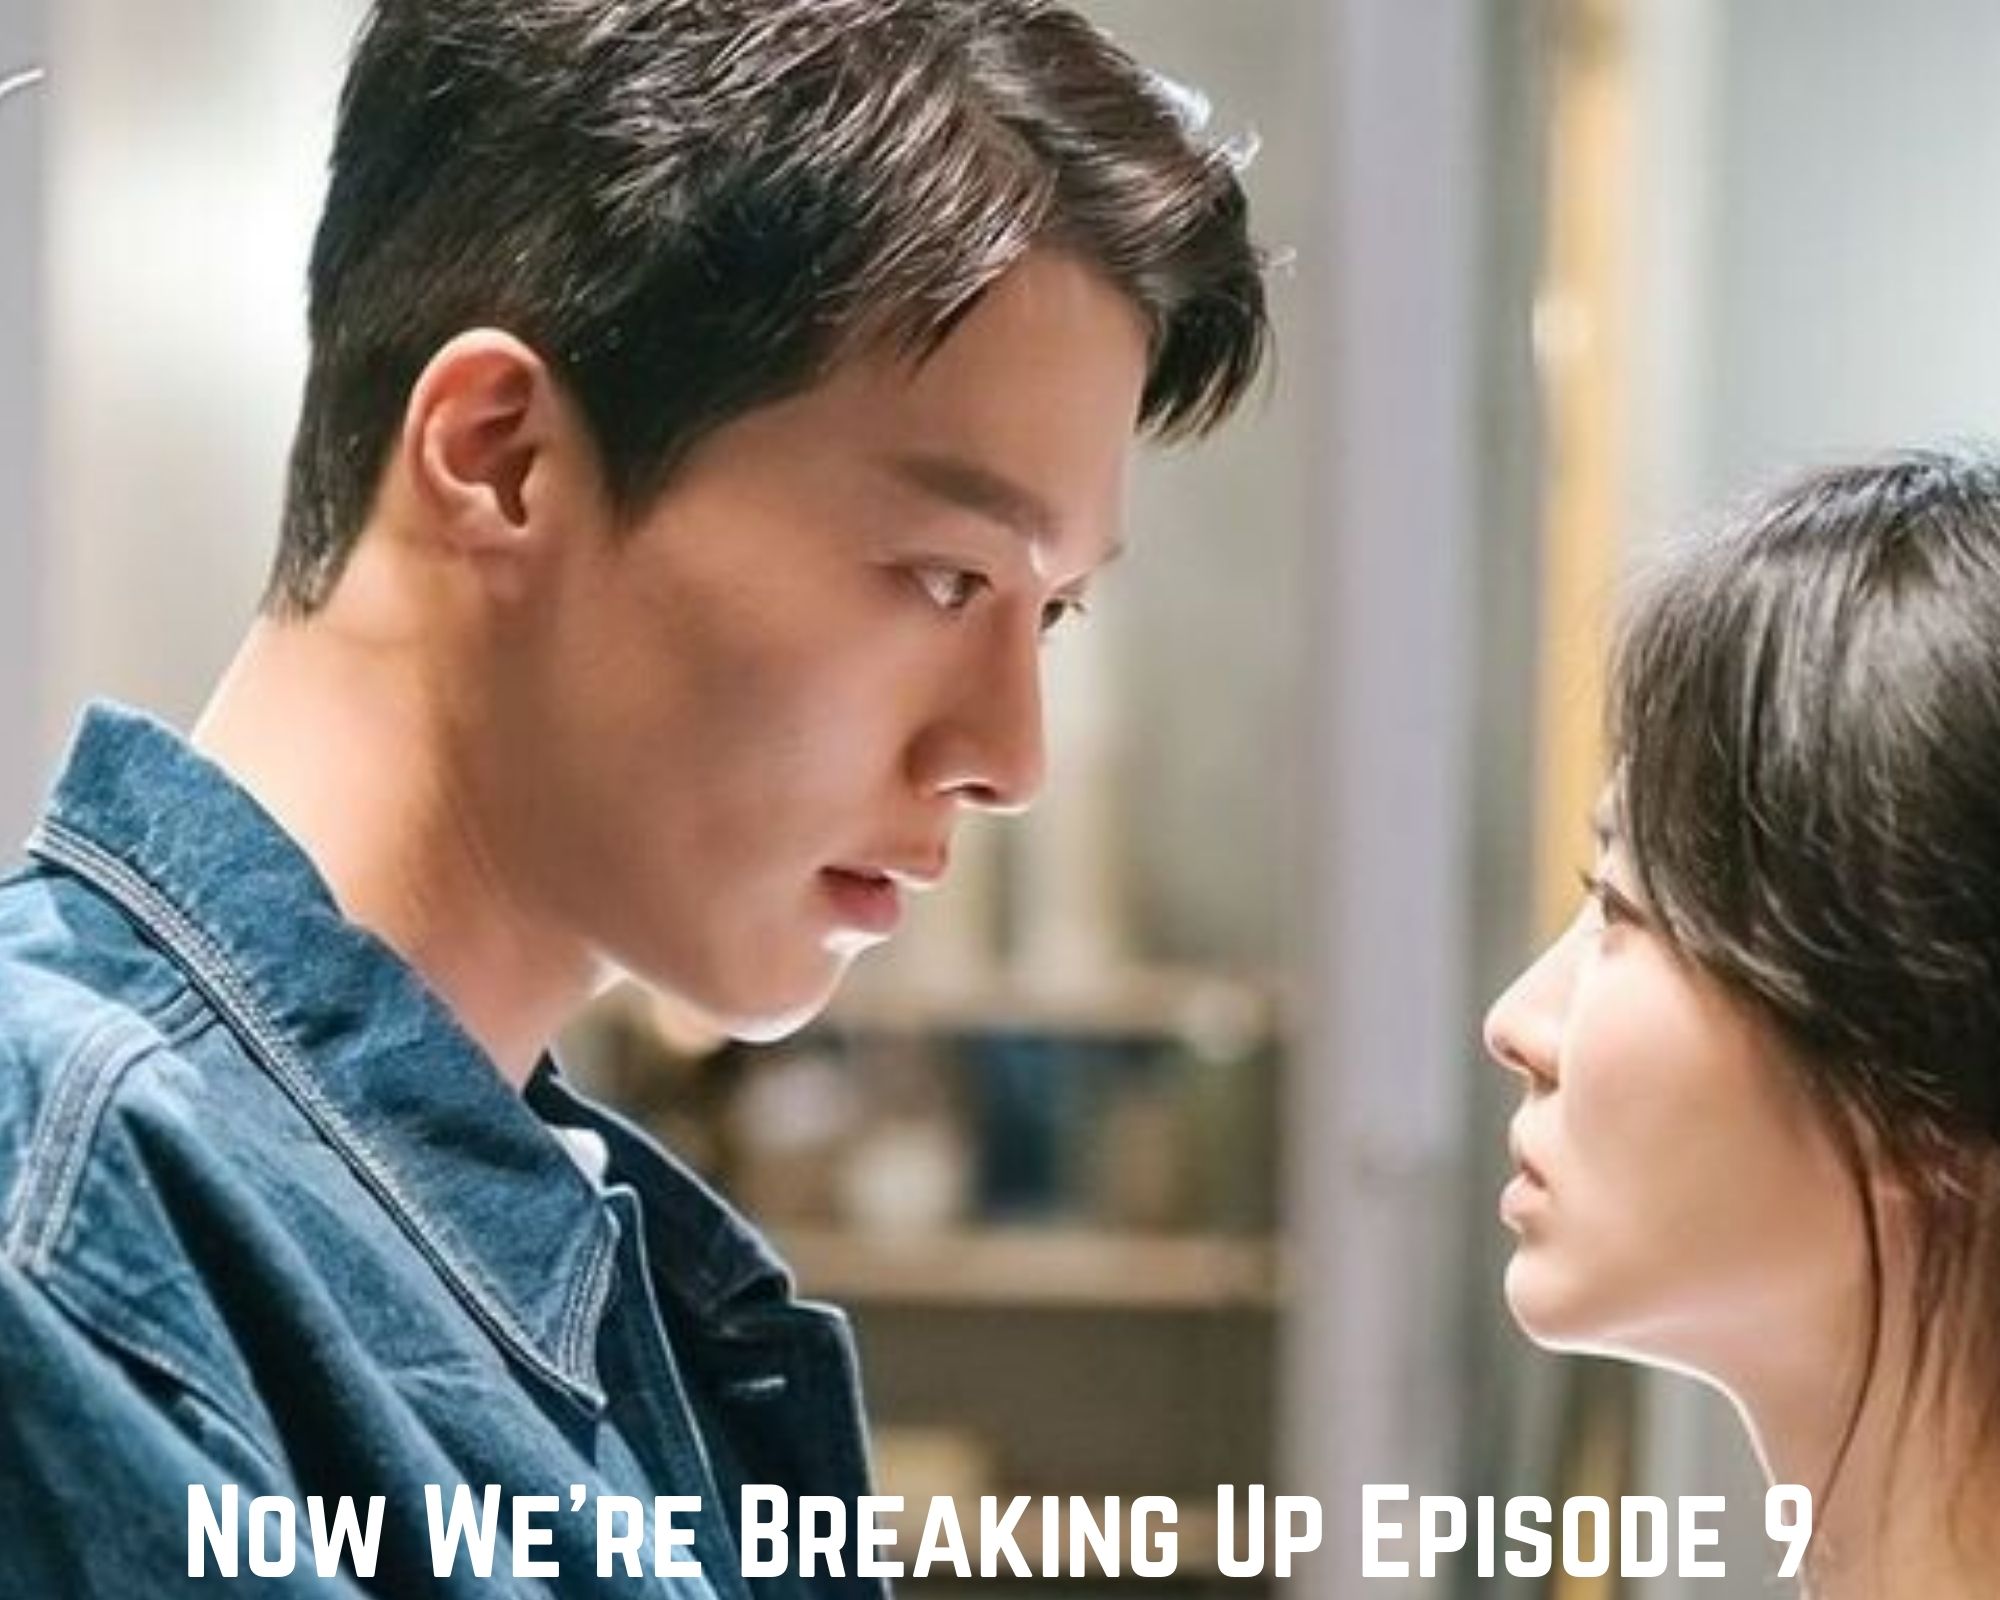 Where to watch now we are breaking up